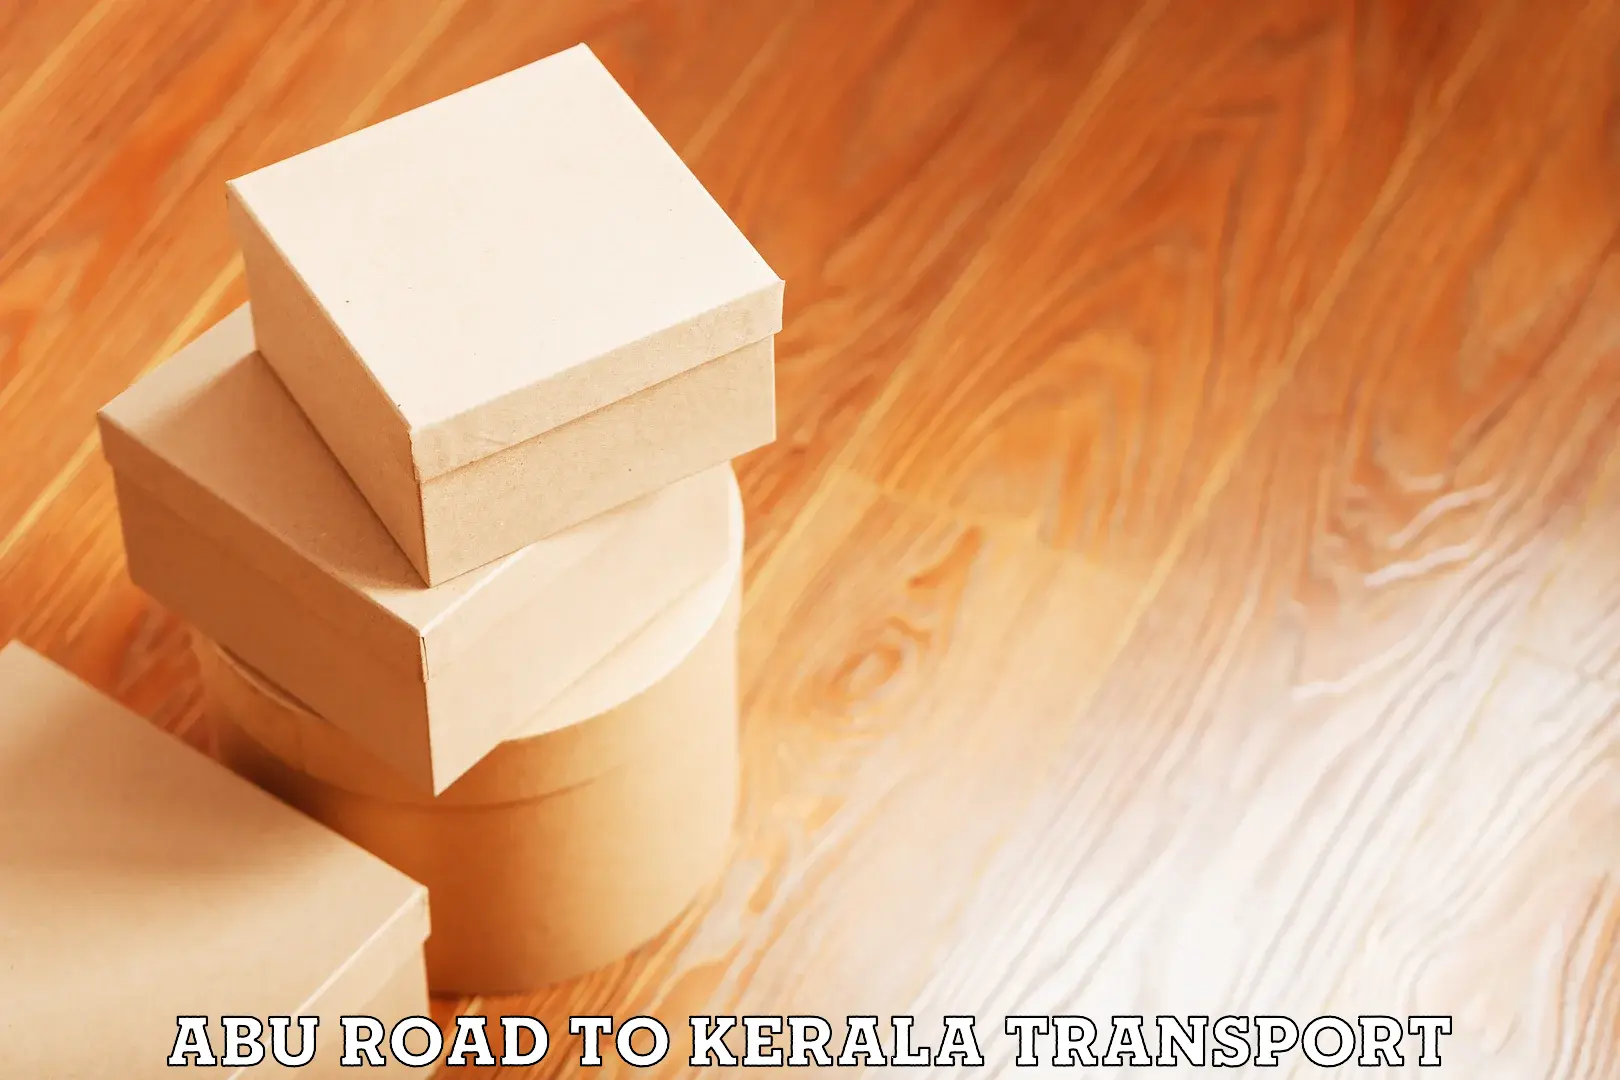 Road transport online services Abu Road to Kerala